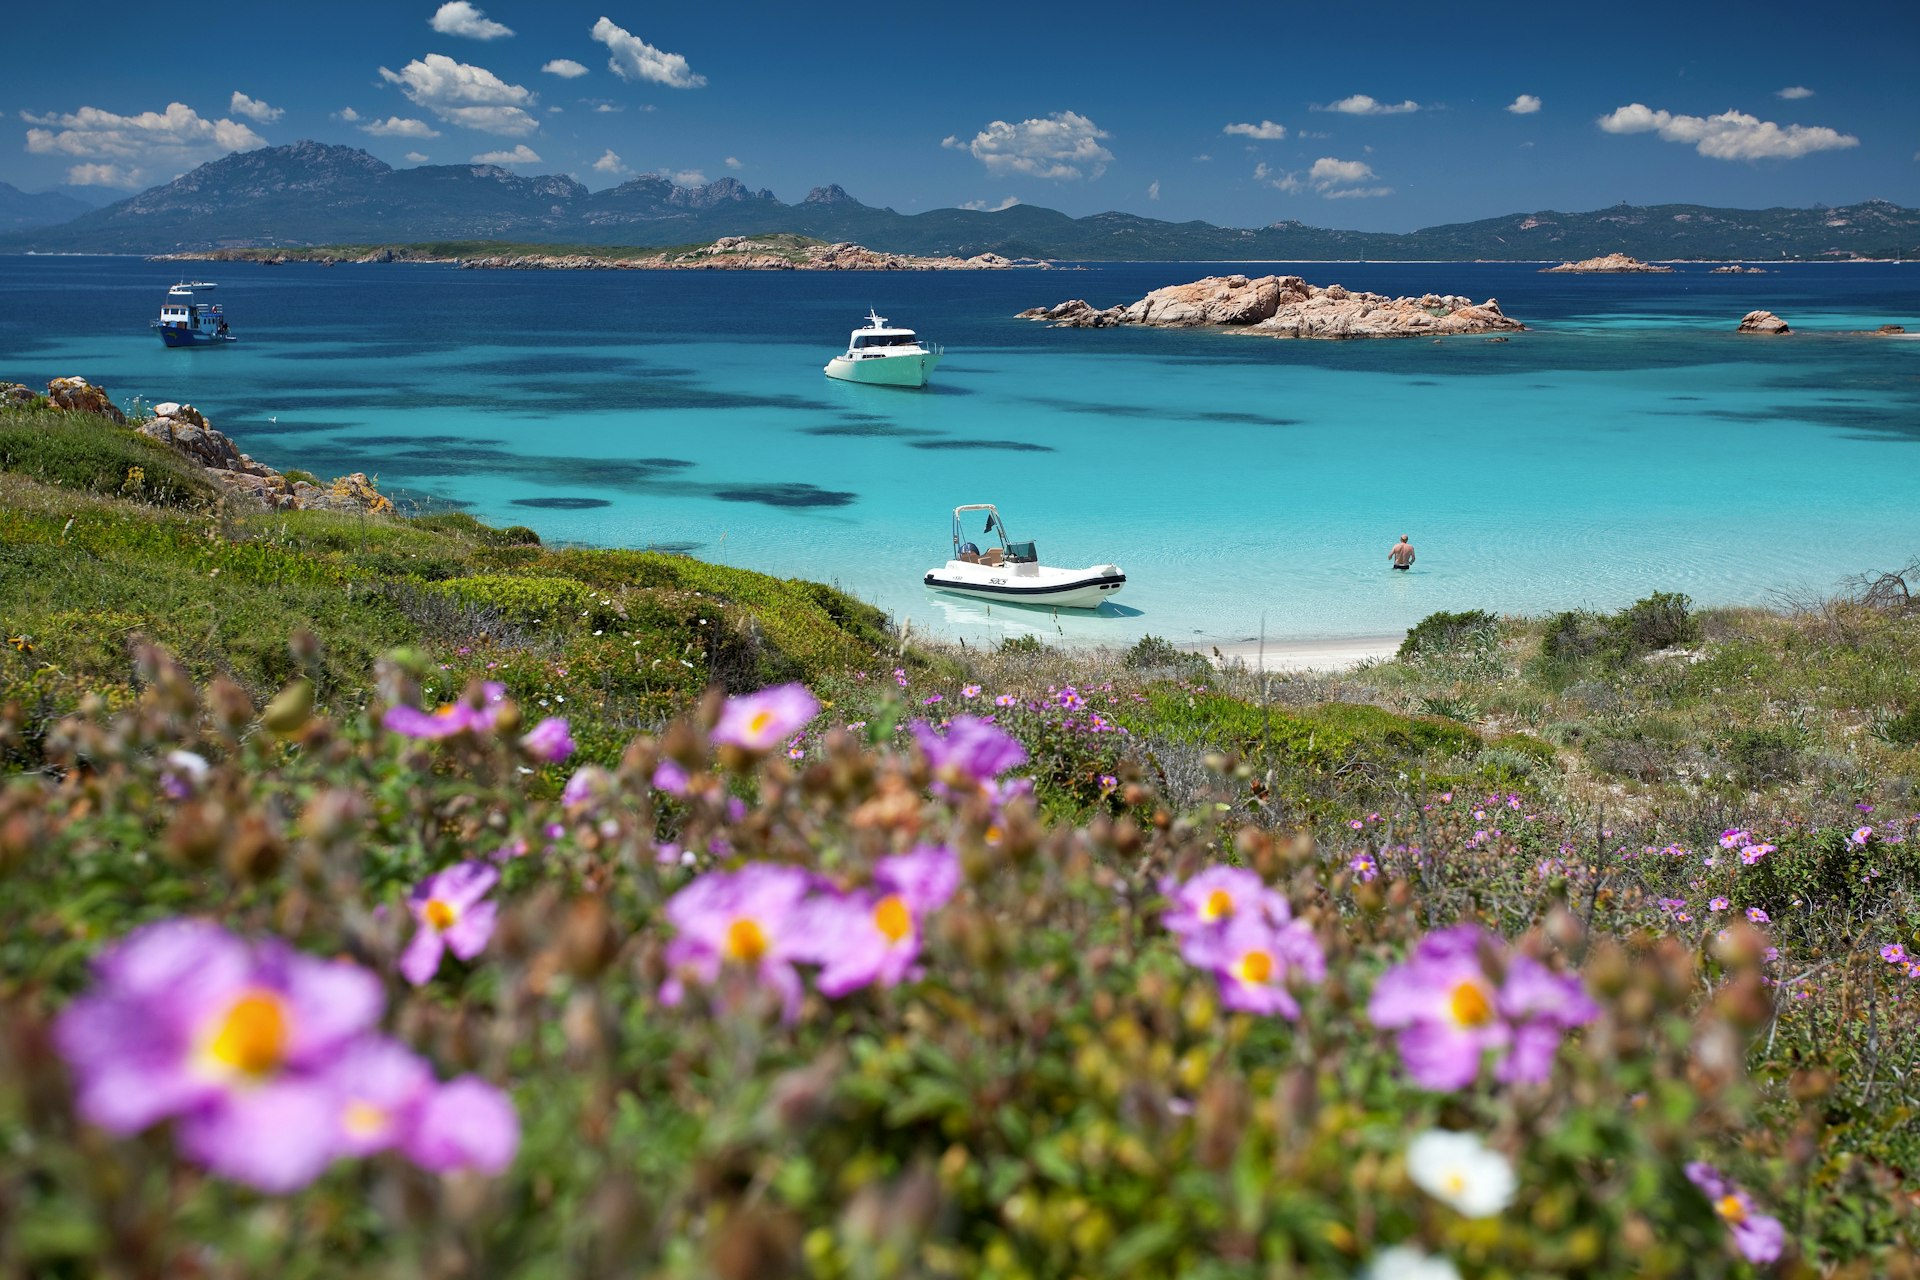 A view of Parco Nazionale dell'Arcipelago di la Maddalena. In the foreground of the image are a number of wild flowers growing on one of the islands of the archipelago, while in the background a blue sea is visible, with a couple of boats bobbing on it.